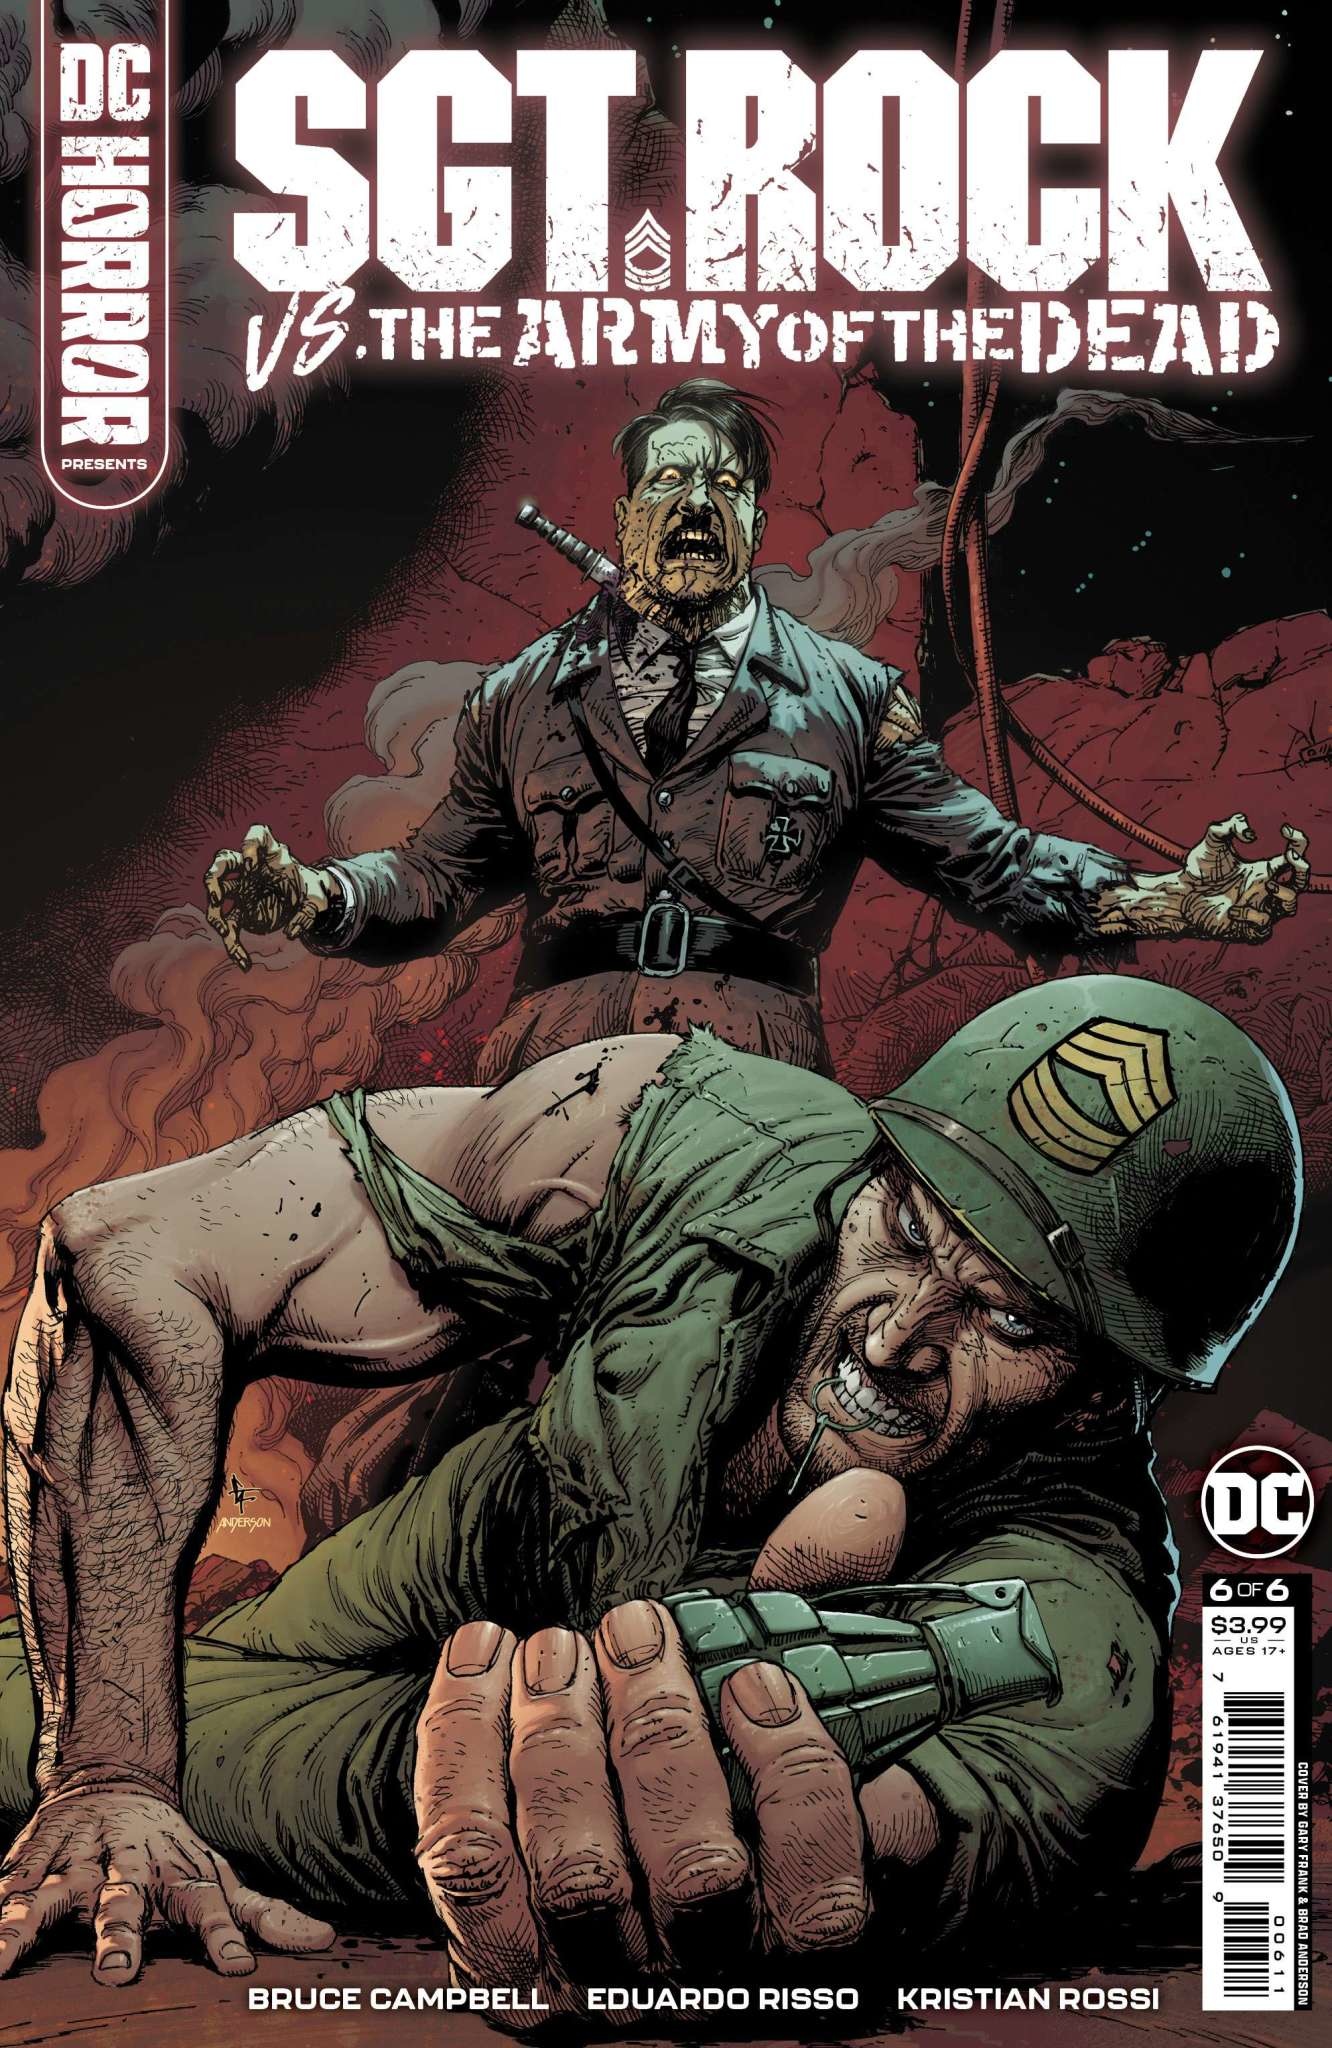 DC DC Horror Presents Sgt Rock Vs The Army Of The Dead #6 (Of 6) Cvr A Gary Frank (MR)